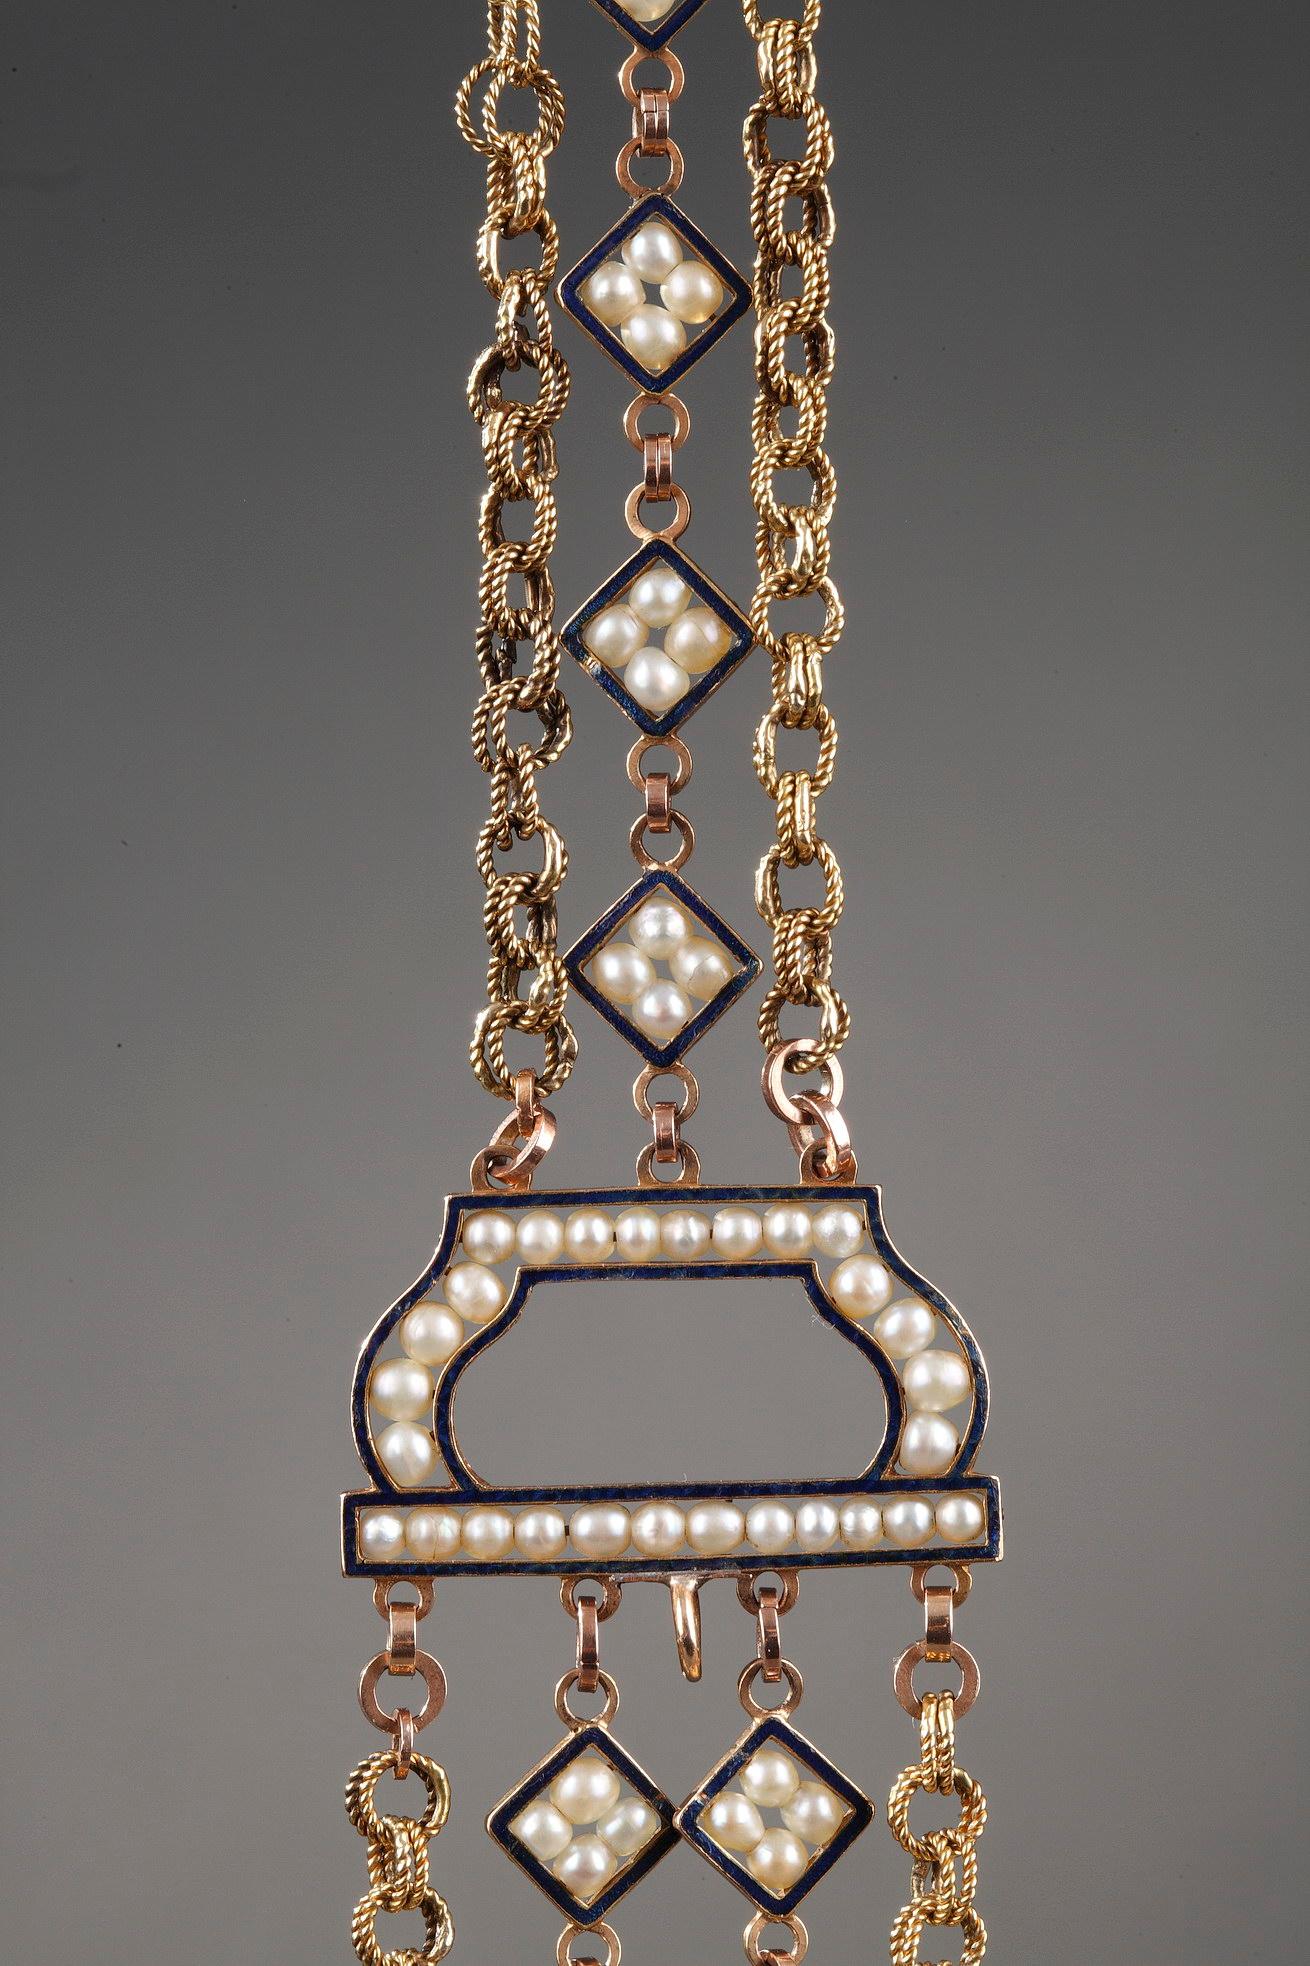 Chatelaine with Gold, Enamel and Pearls, Late 18th Century Work For Sale 1